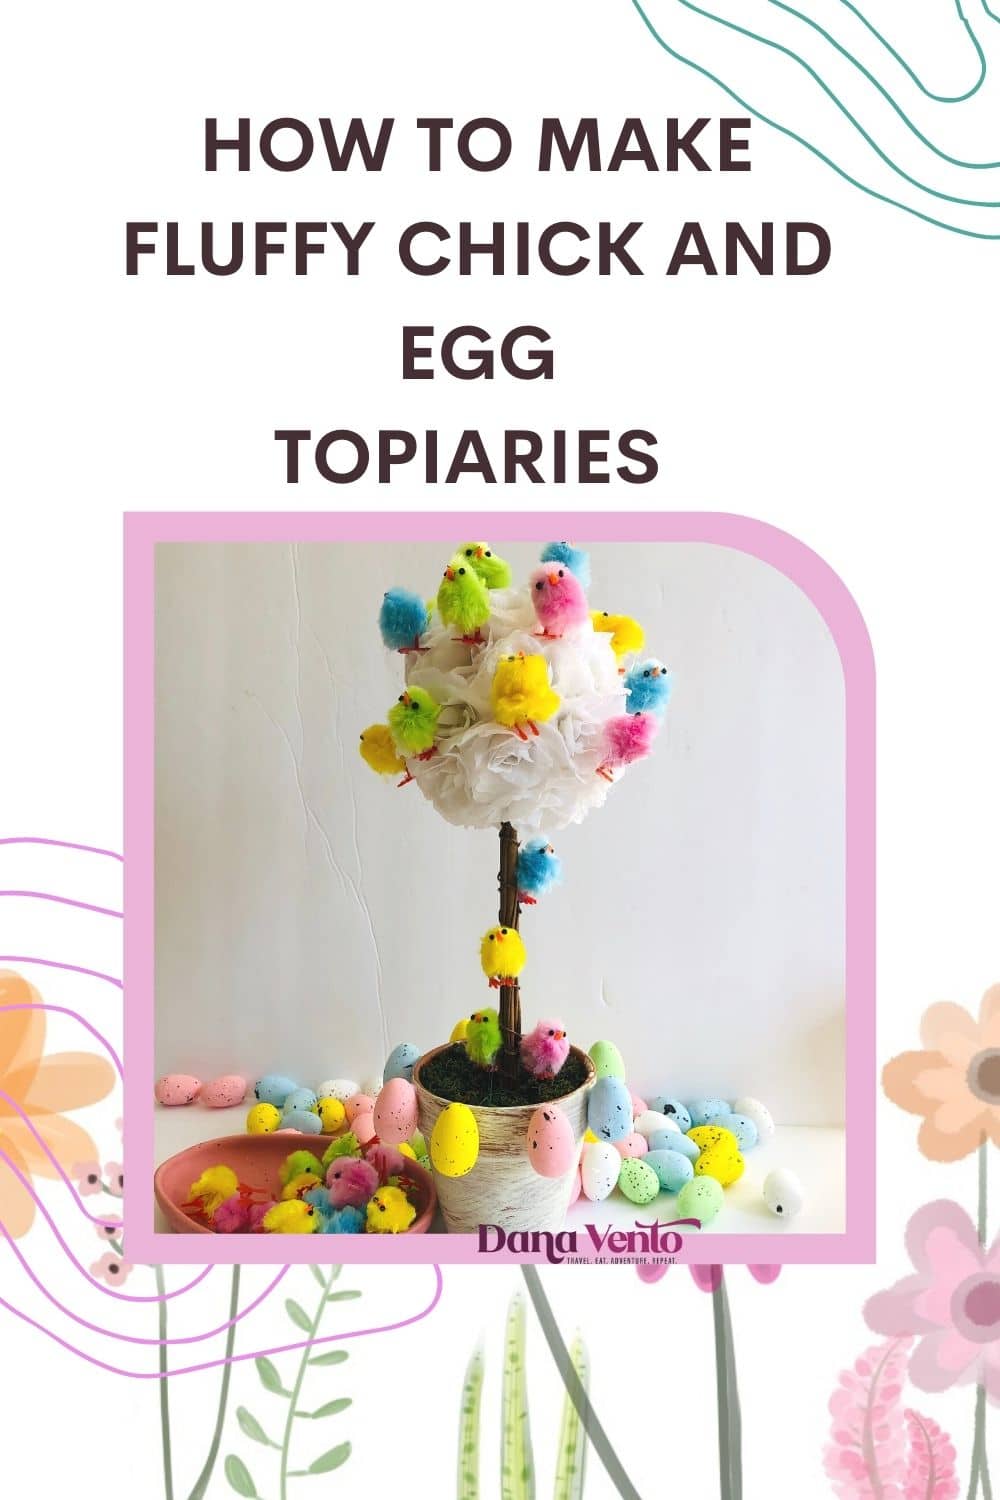 Fluffy chick and egg topiaries tutorial cover